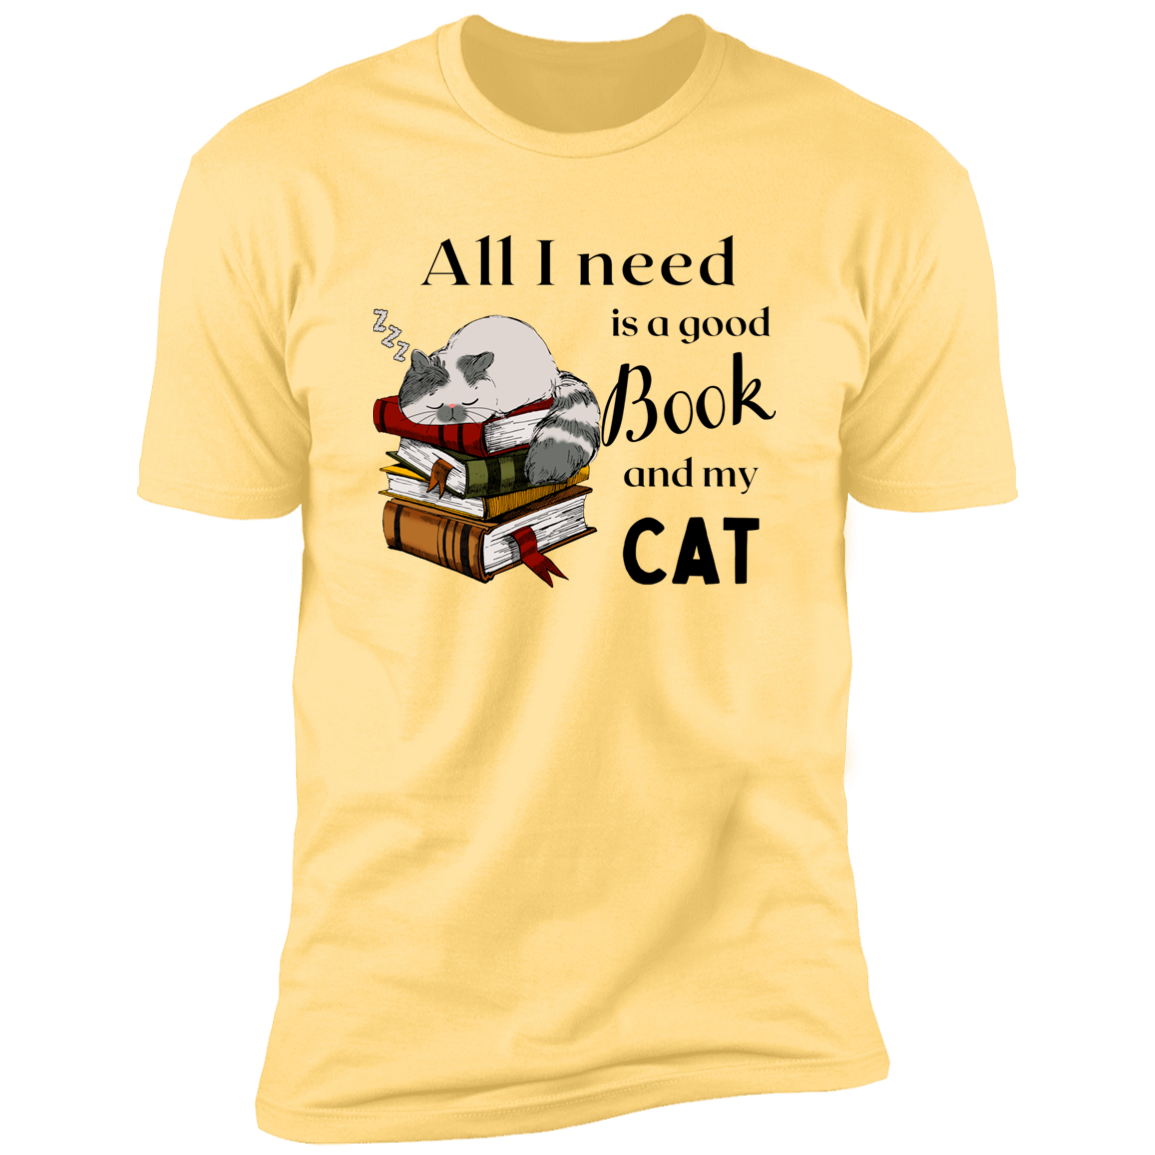 All I Need is a Good Book and My Cat t-shirt for humans, in banana cream